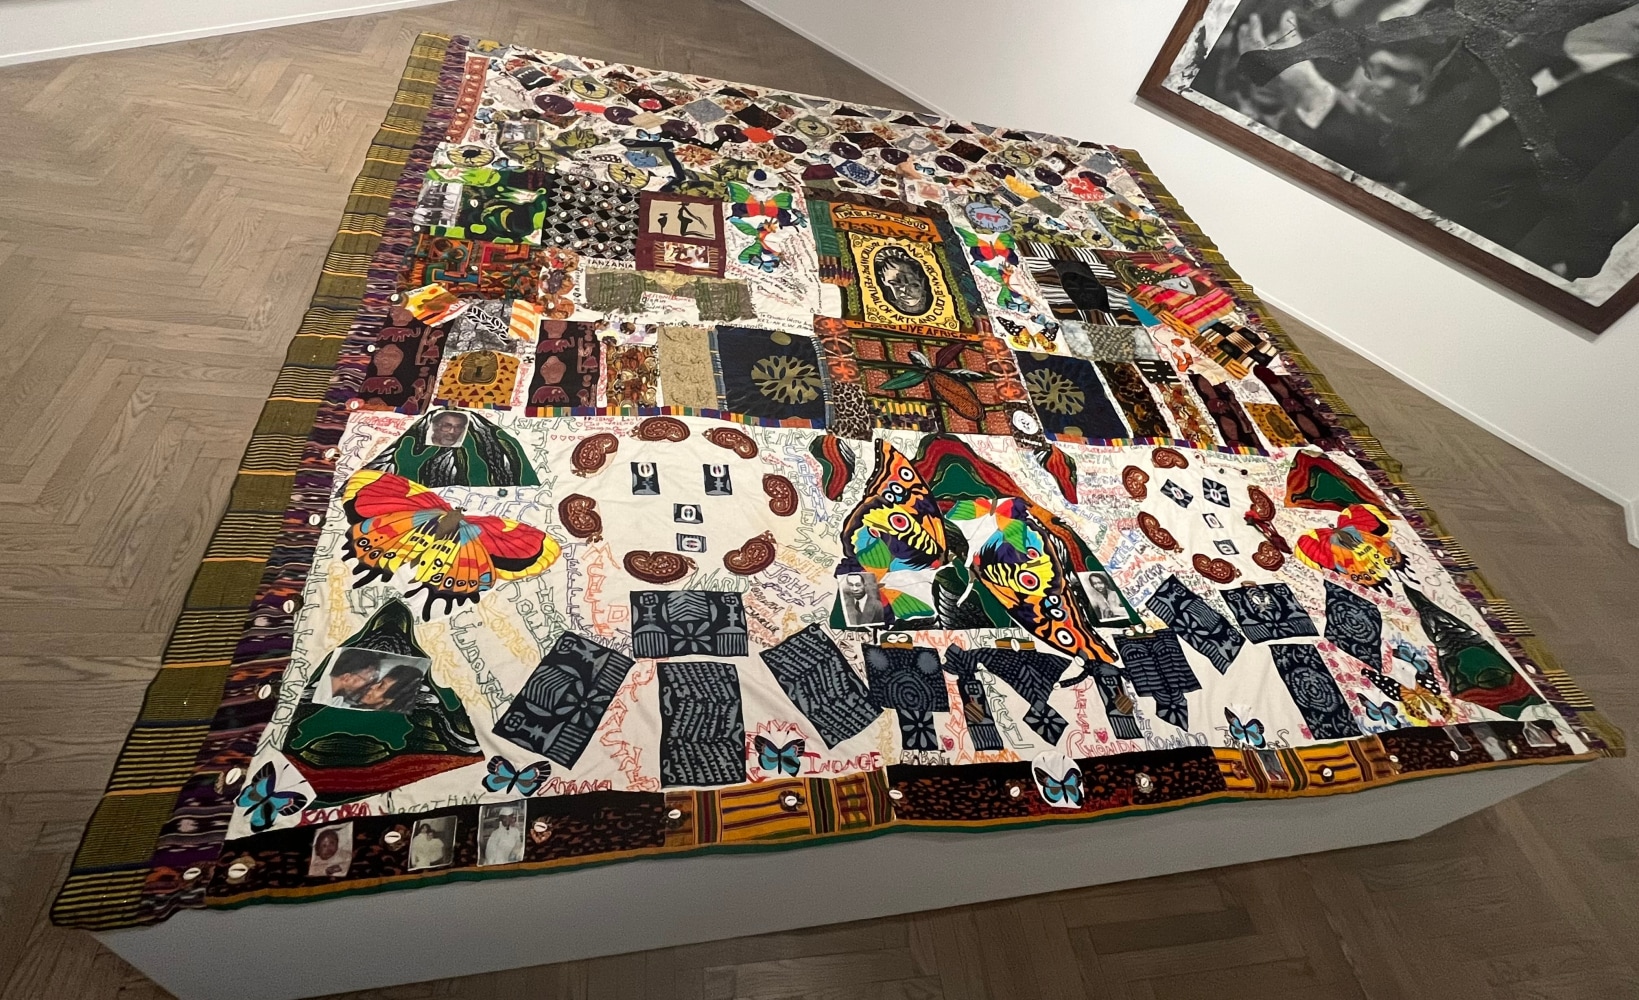 Val Gray Ward
Peace The Way Home, 1978-2022
Quilted textiles and sound
9 ft. 9 1/2 in. x 9 ft. 9 in.
(2.9 x&amp;nbsp; 2.9 m)